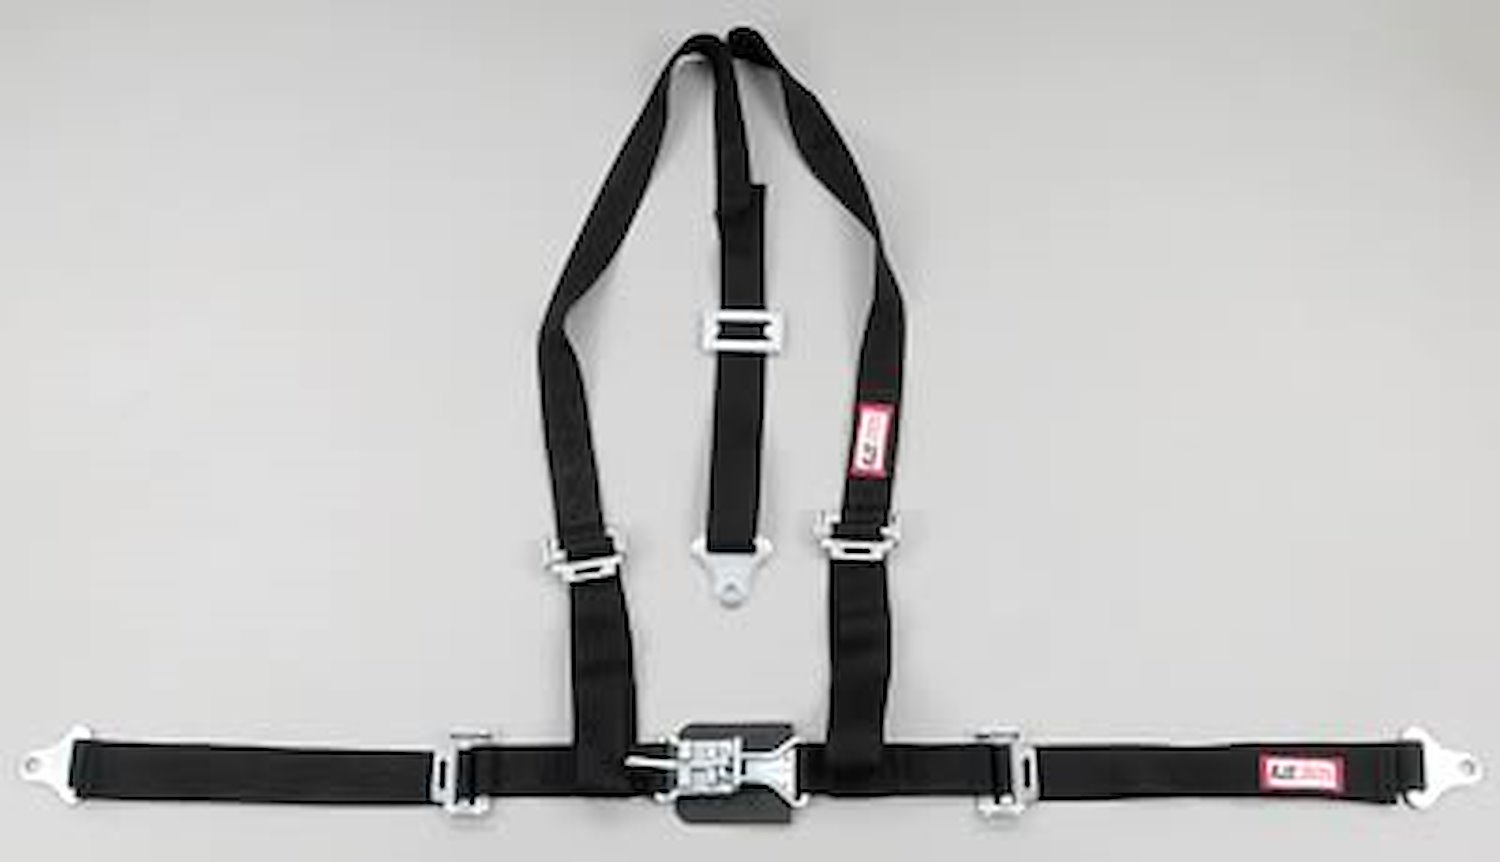 NON-SFI L&L HARNESS 2 PULL DOWN Lap Belt SEWN IN 2 S.H. V ROLL BAR Mount ALL SNAP ENDS RED